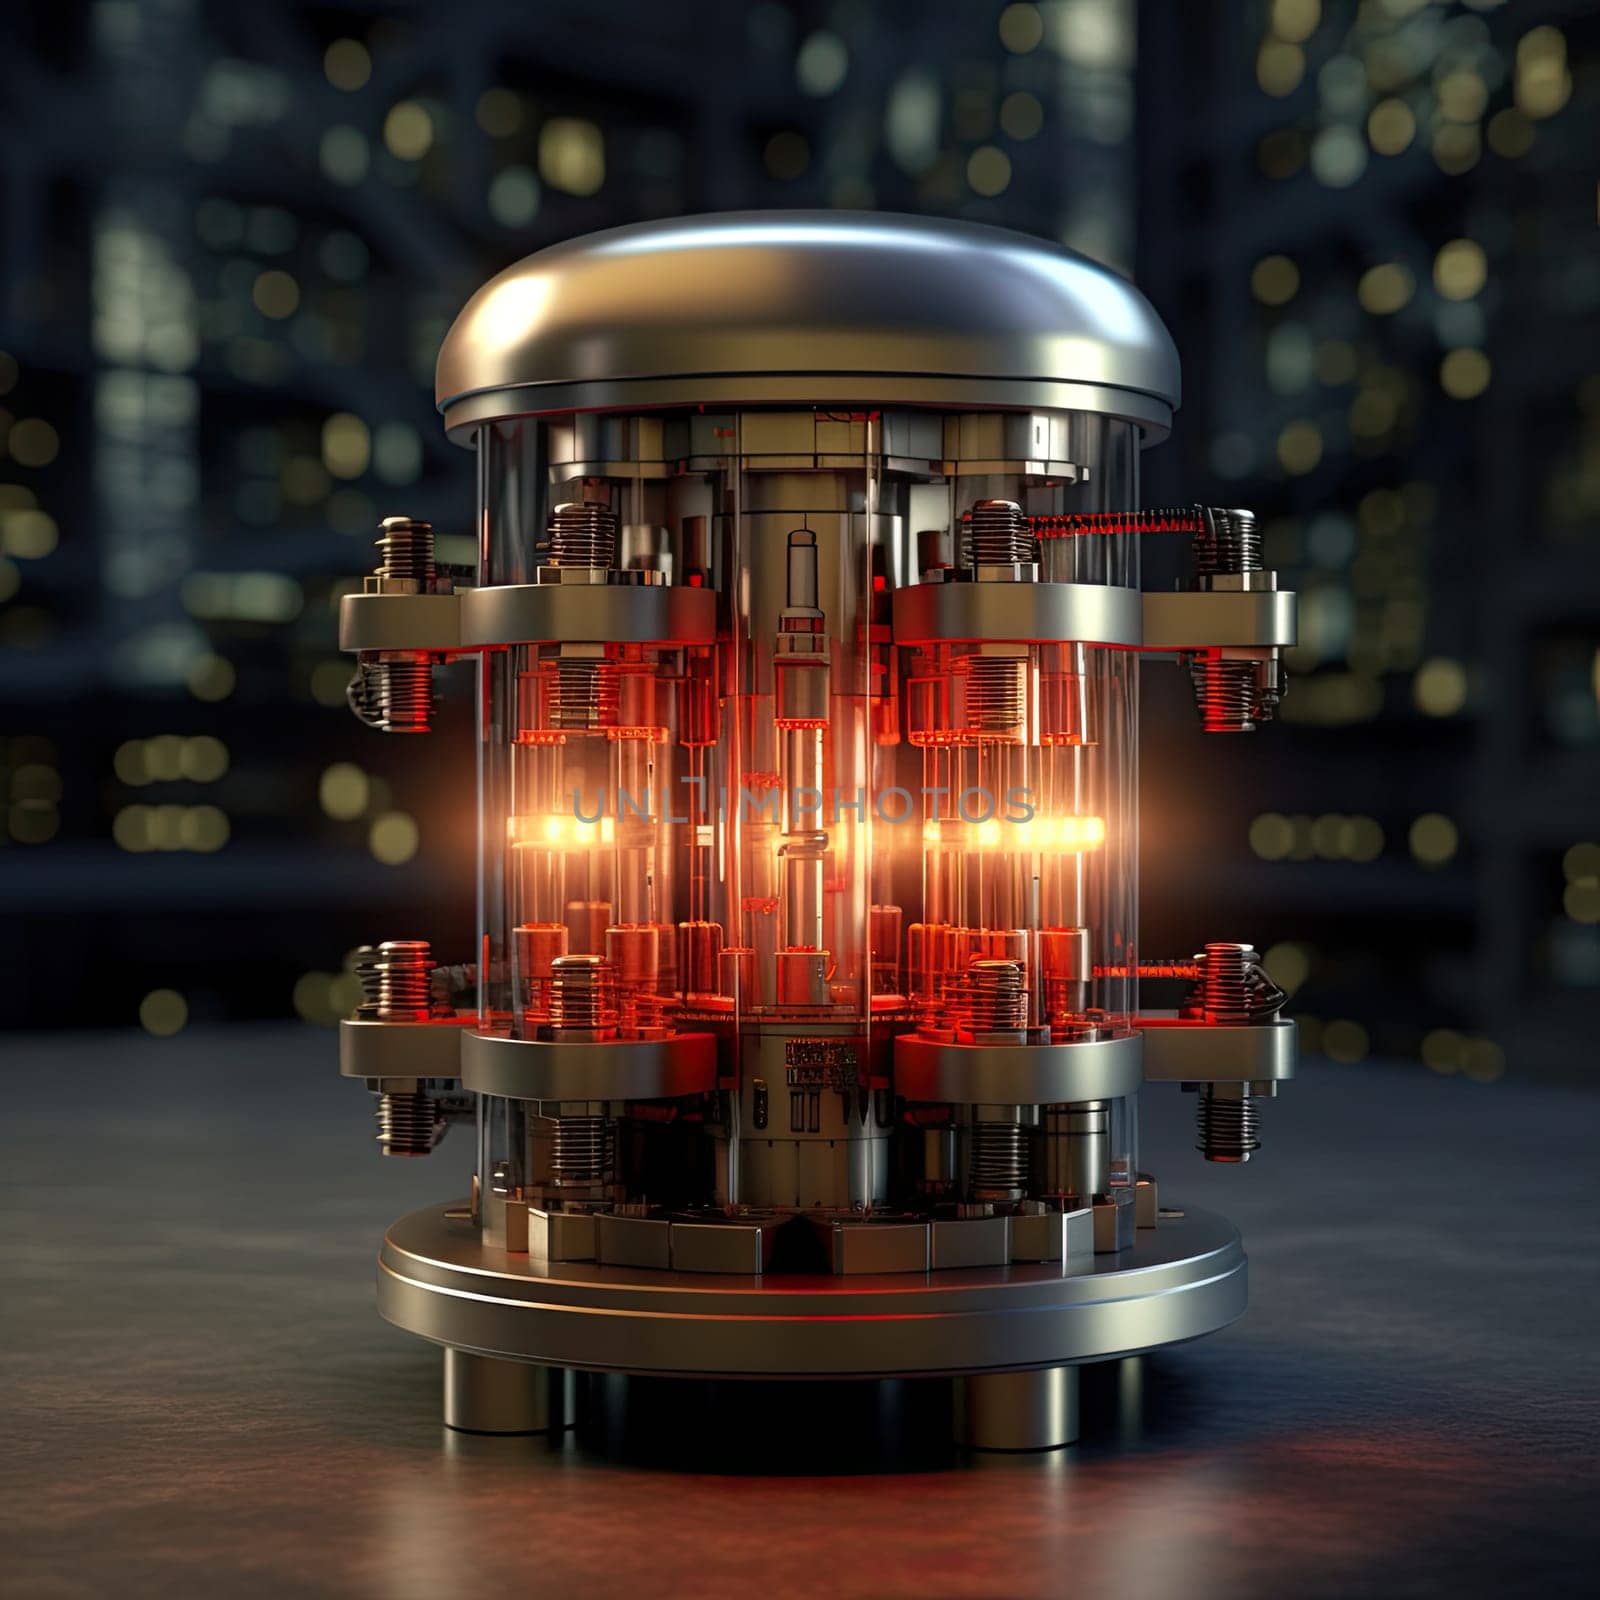 The micro nuclear reactor of the future. The concept of energy sources